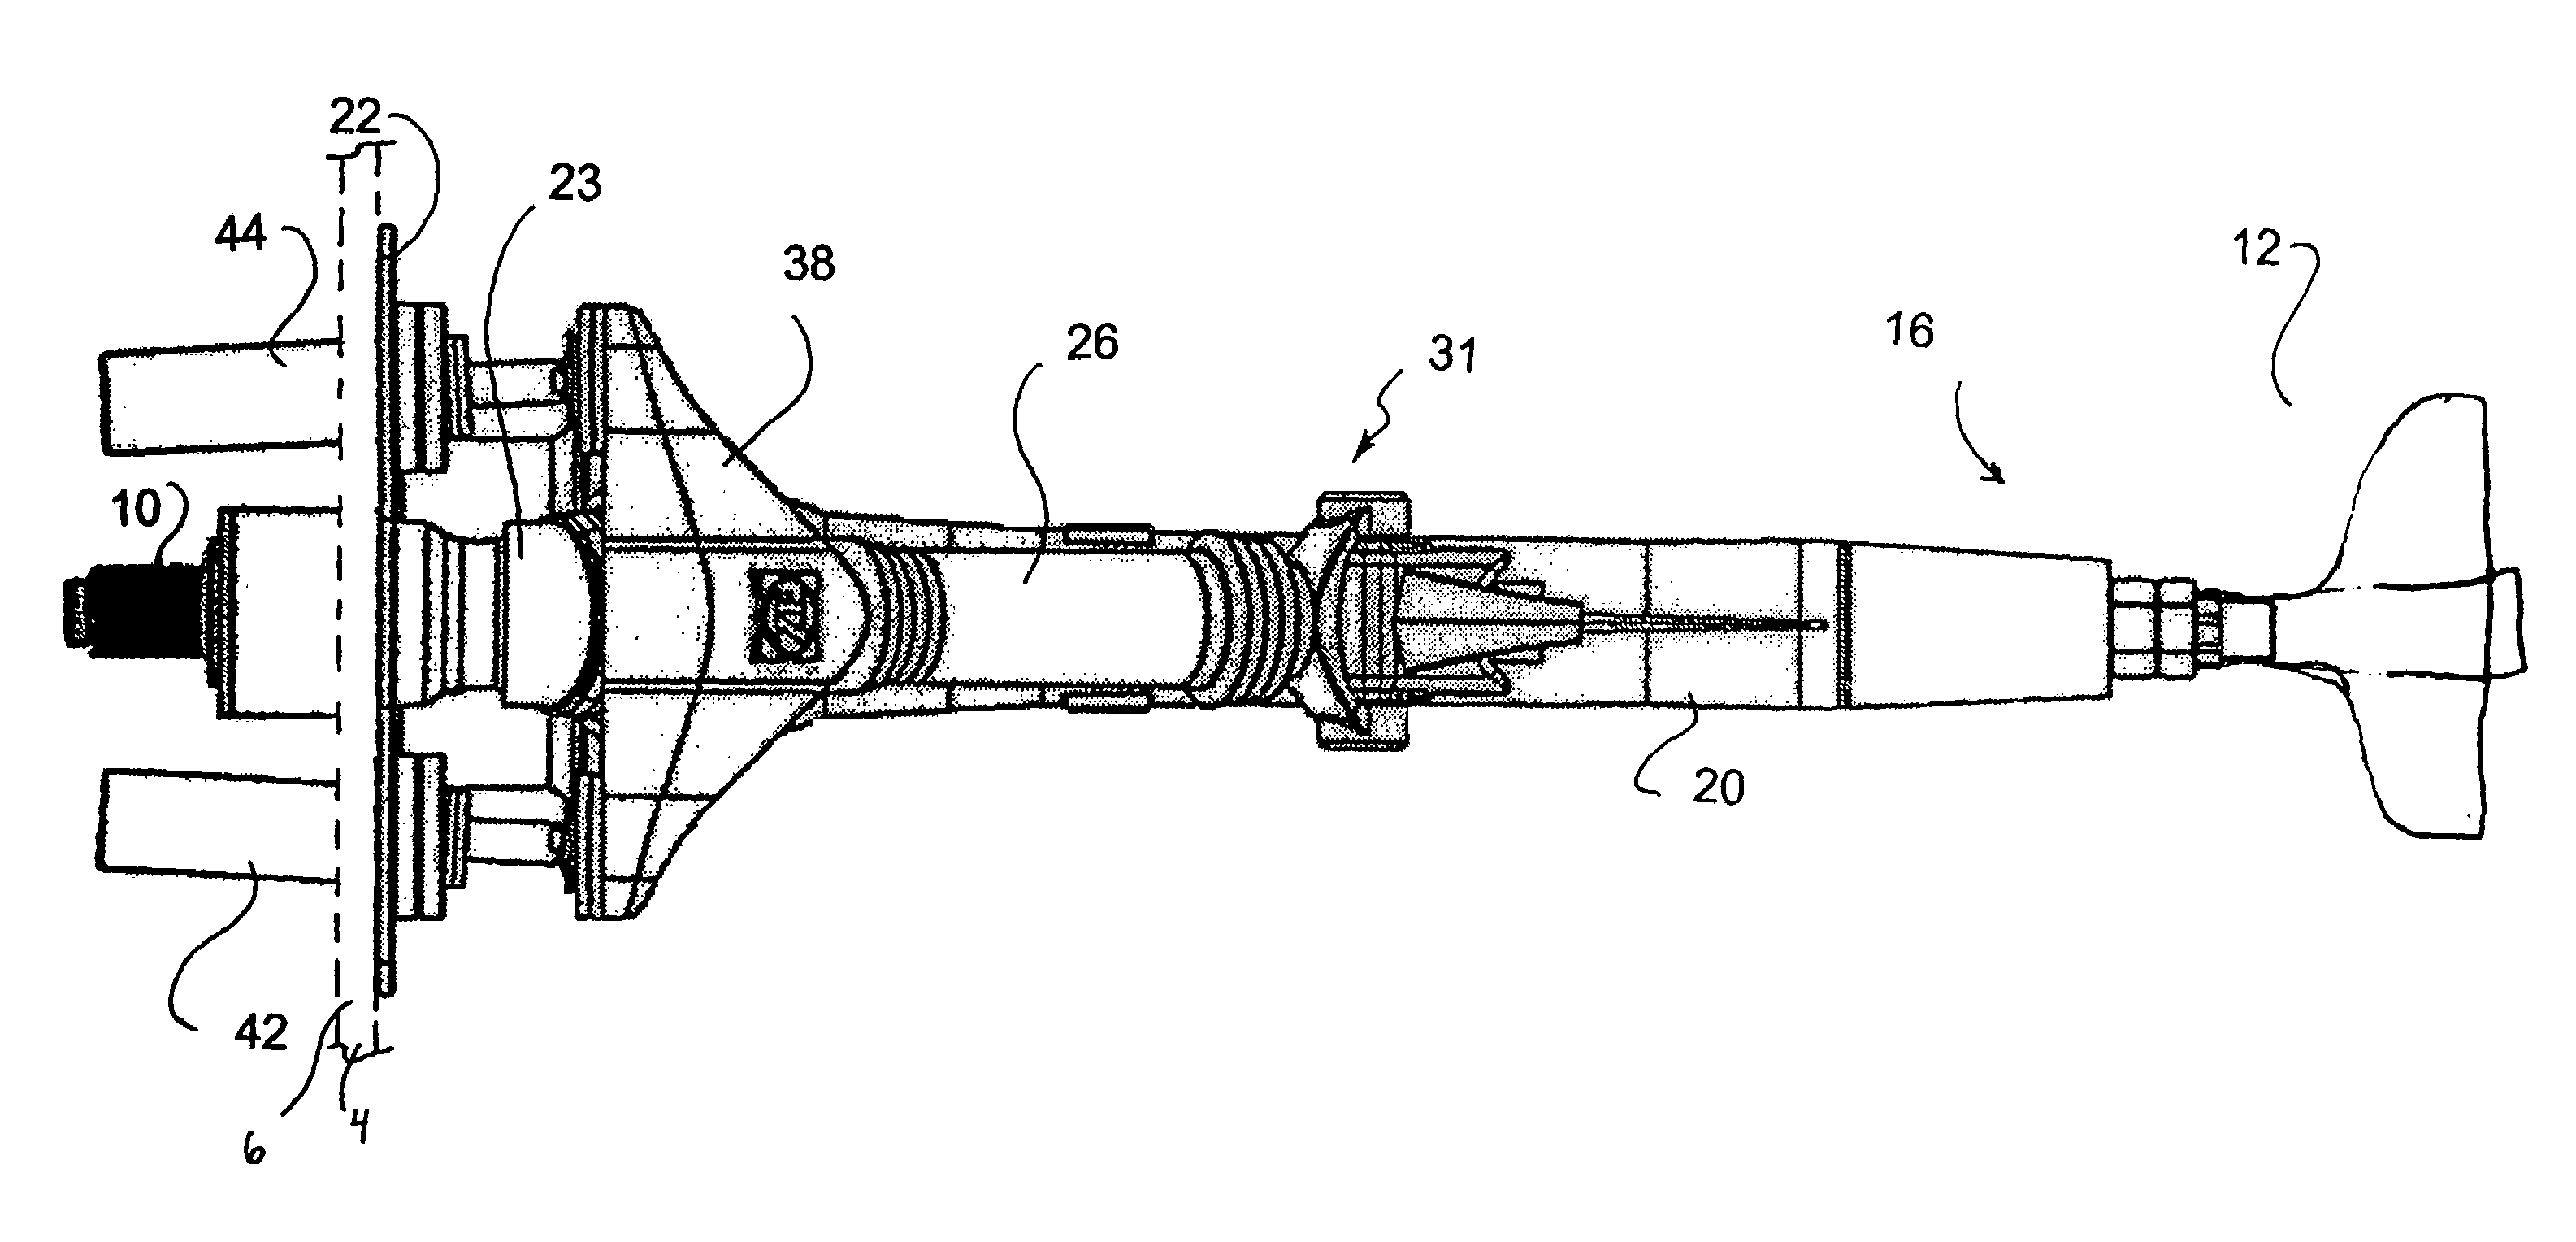 Trim apparatus for marine outdrive with steering capability